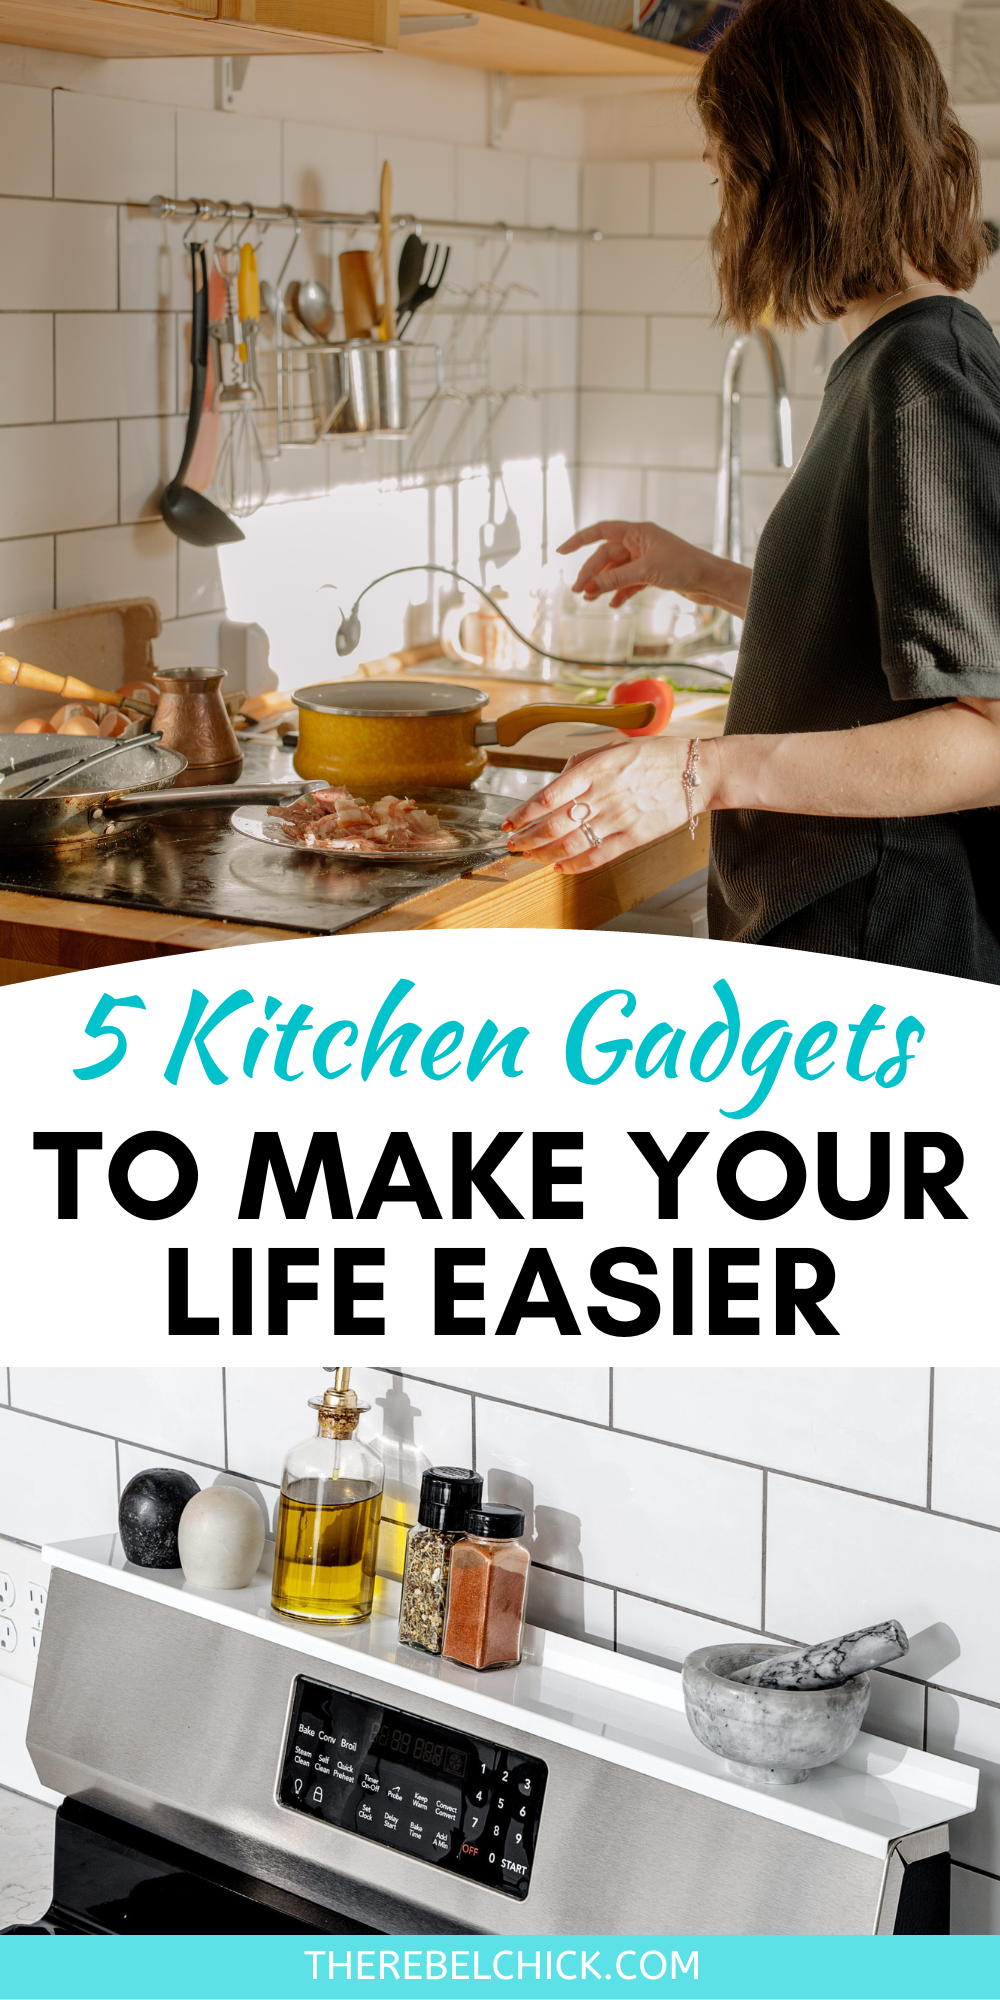 5 Kitchen Gadgets to Make Your Life Easier